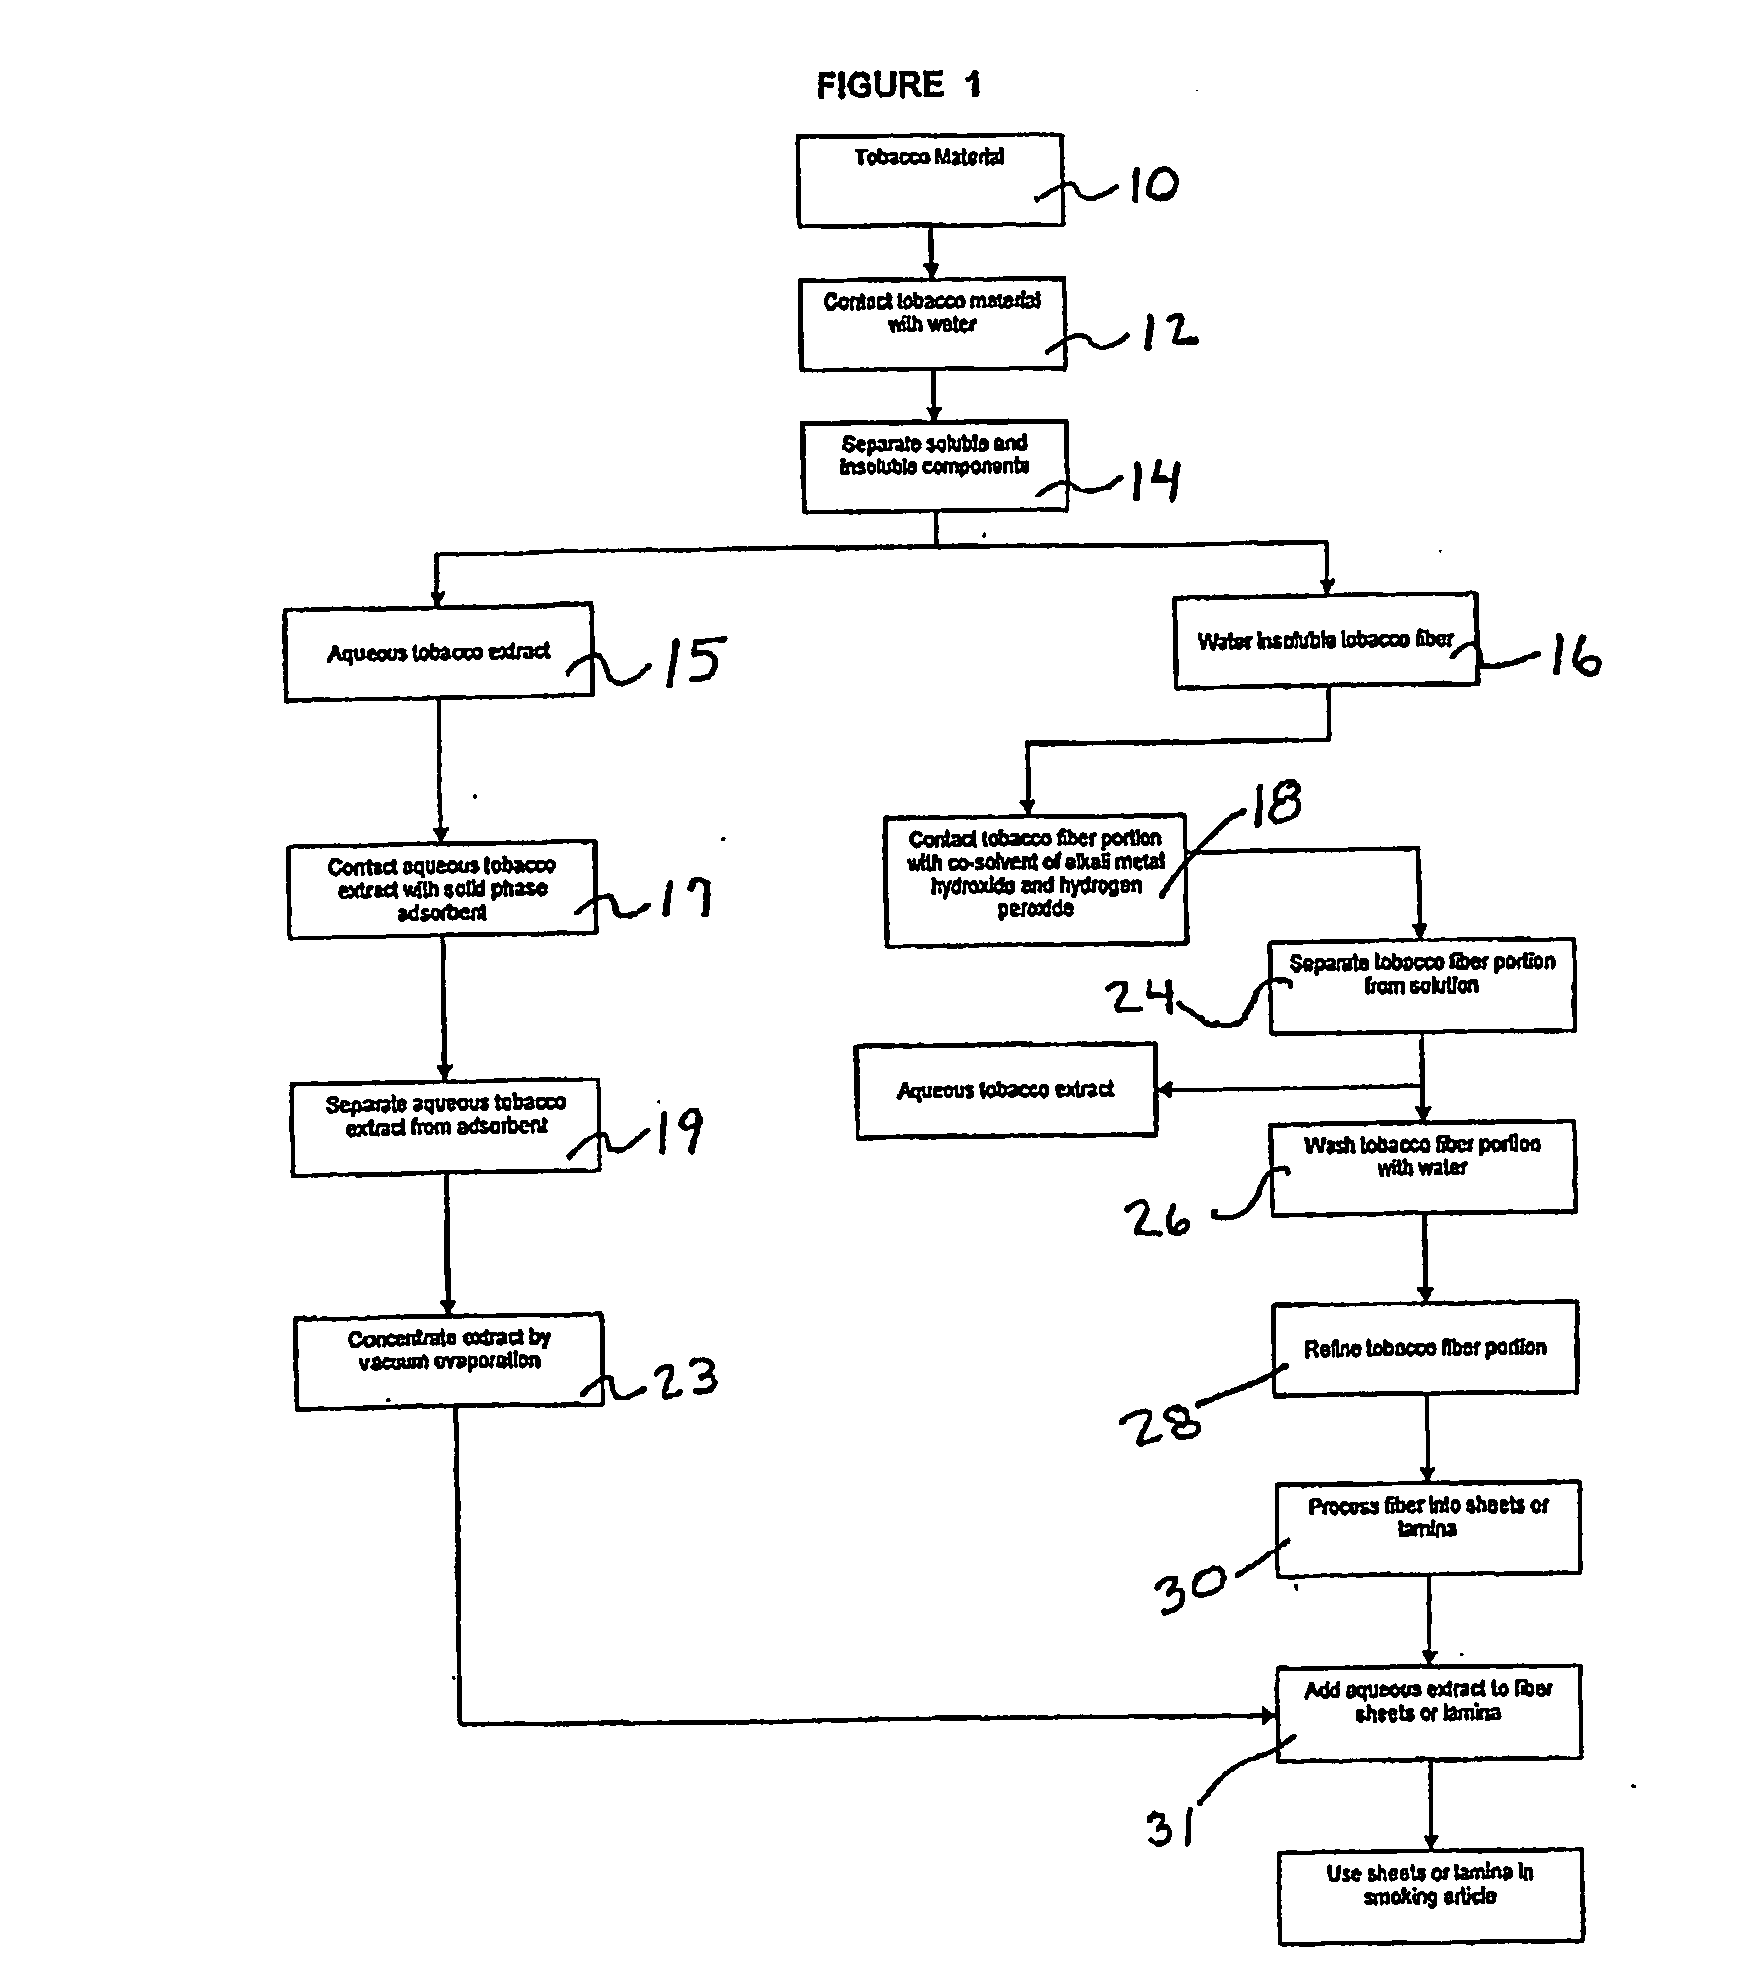 Process for reducing nitrogen containing compounds and lignin in tobacco